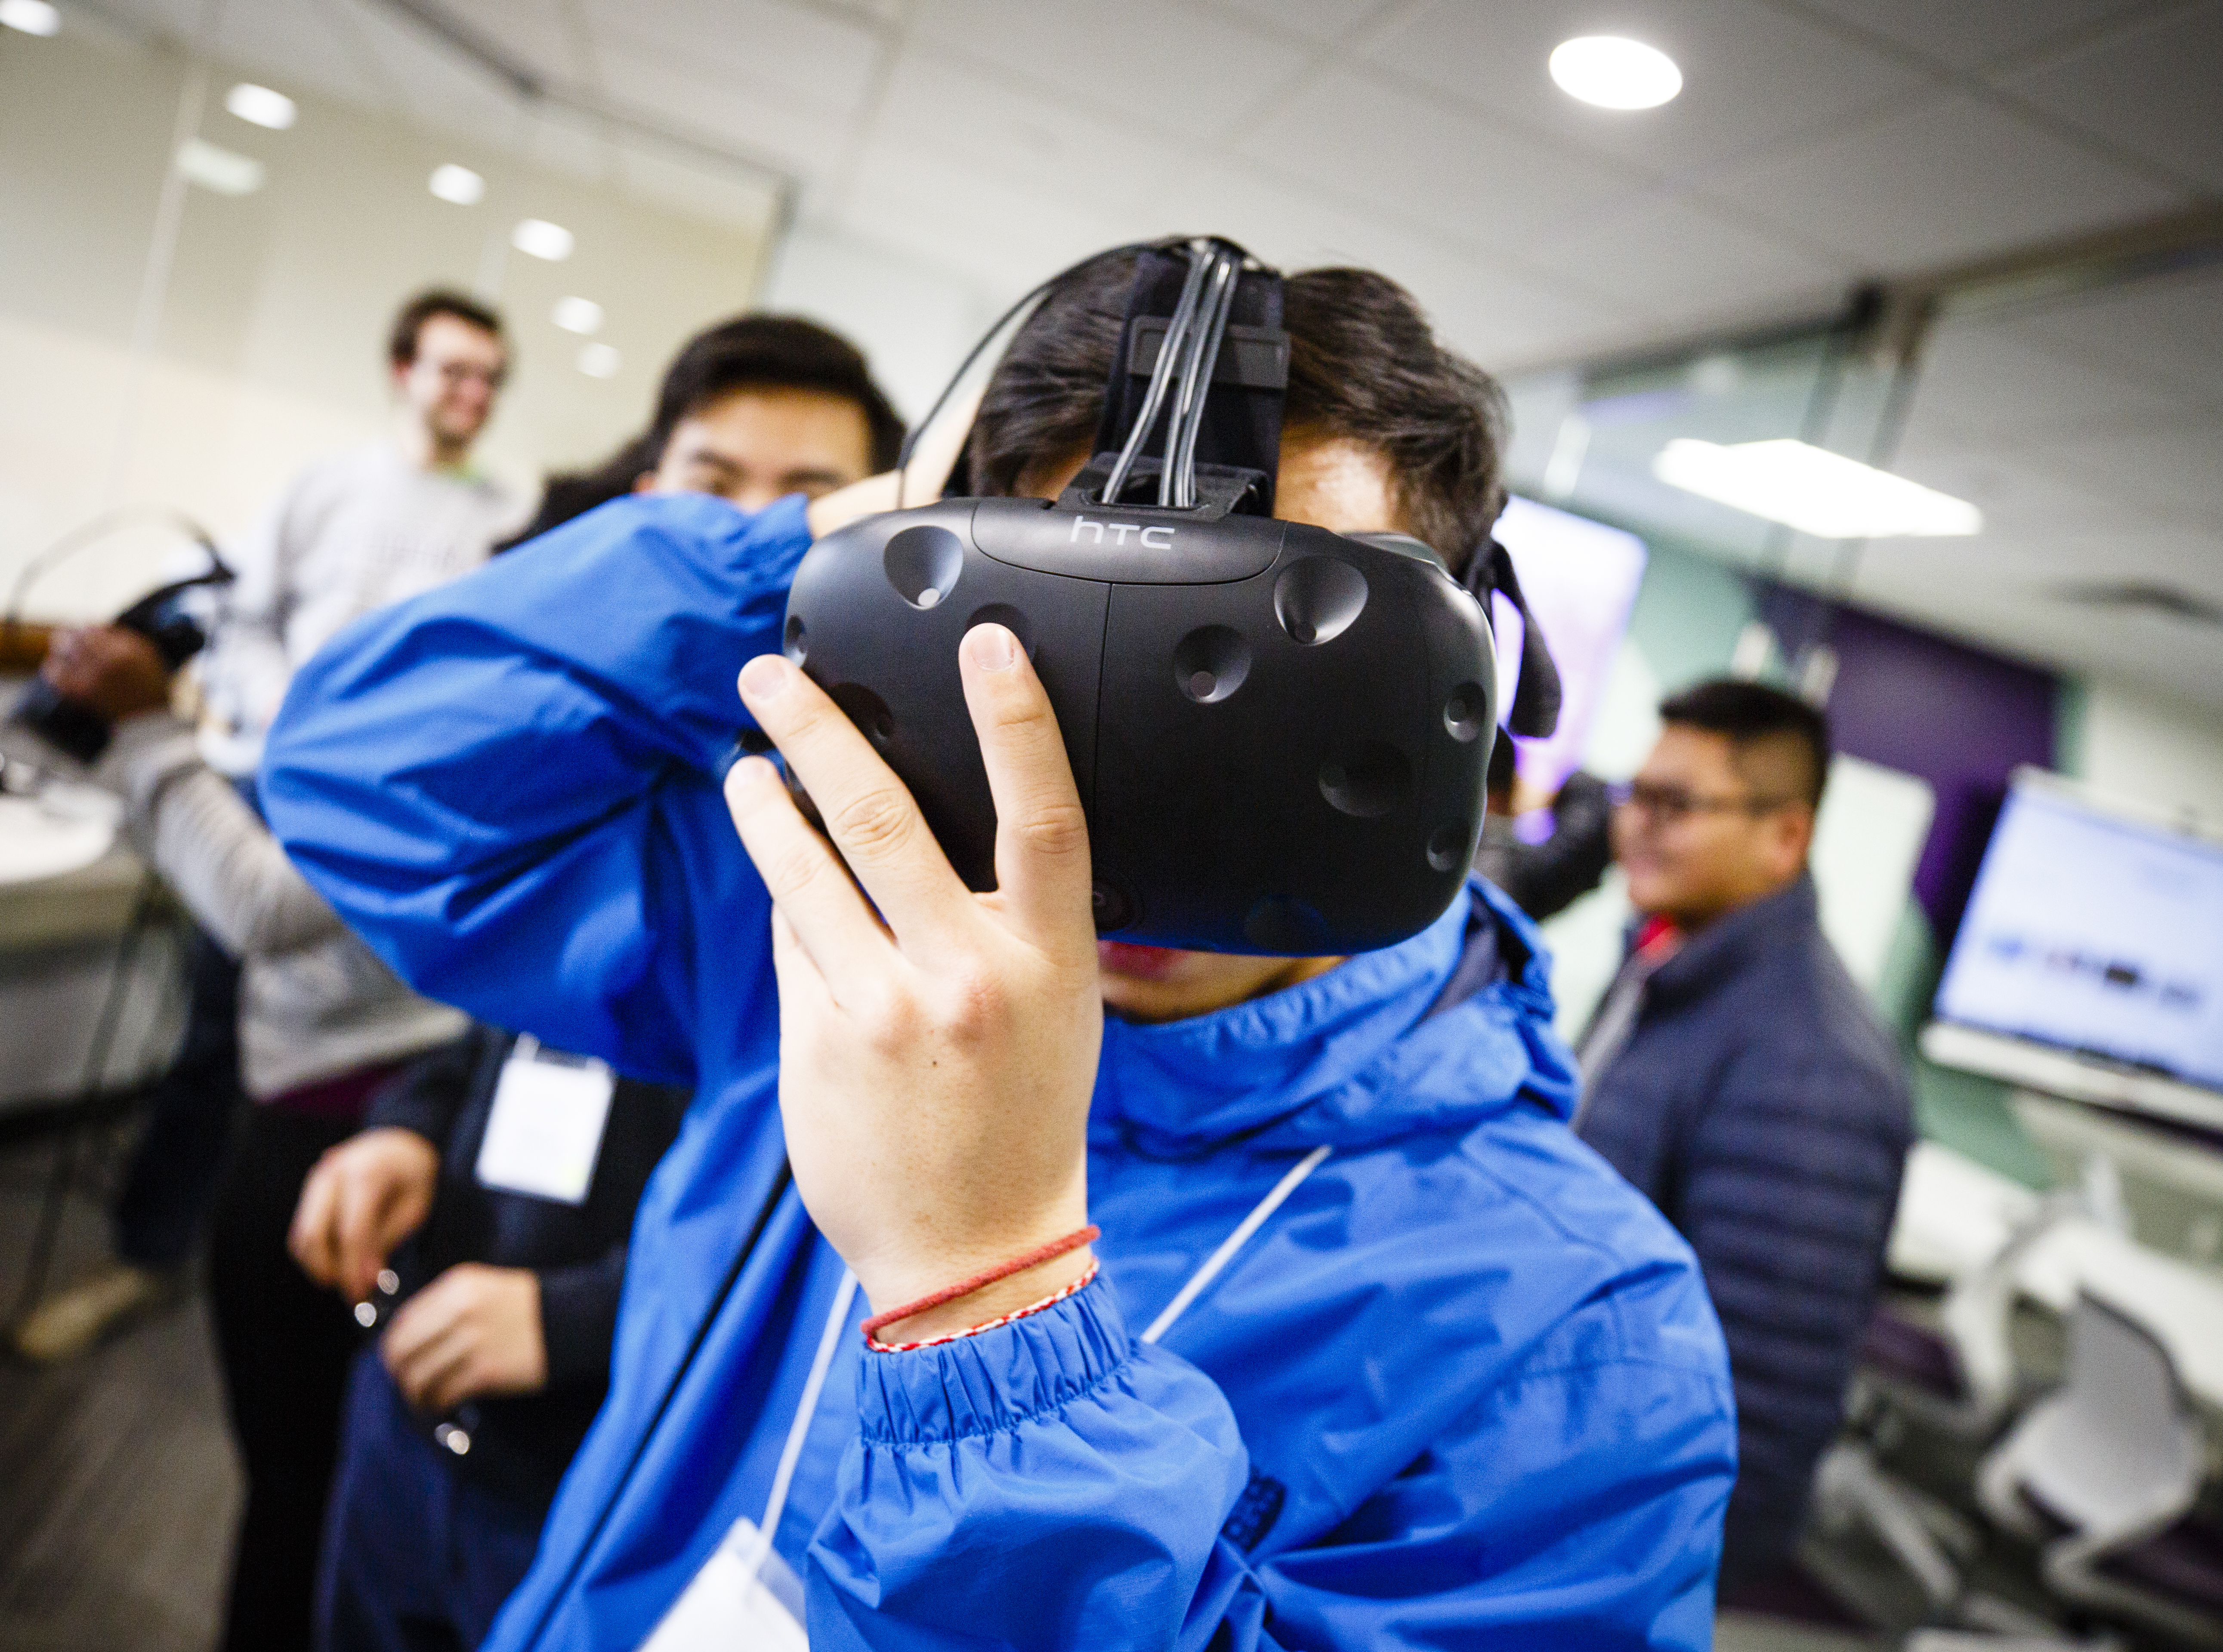 A virtual reality demonstration during the Youth Digital Media Summit